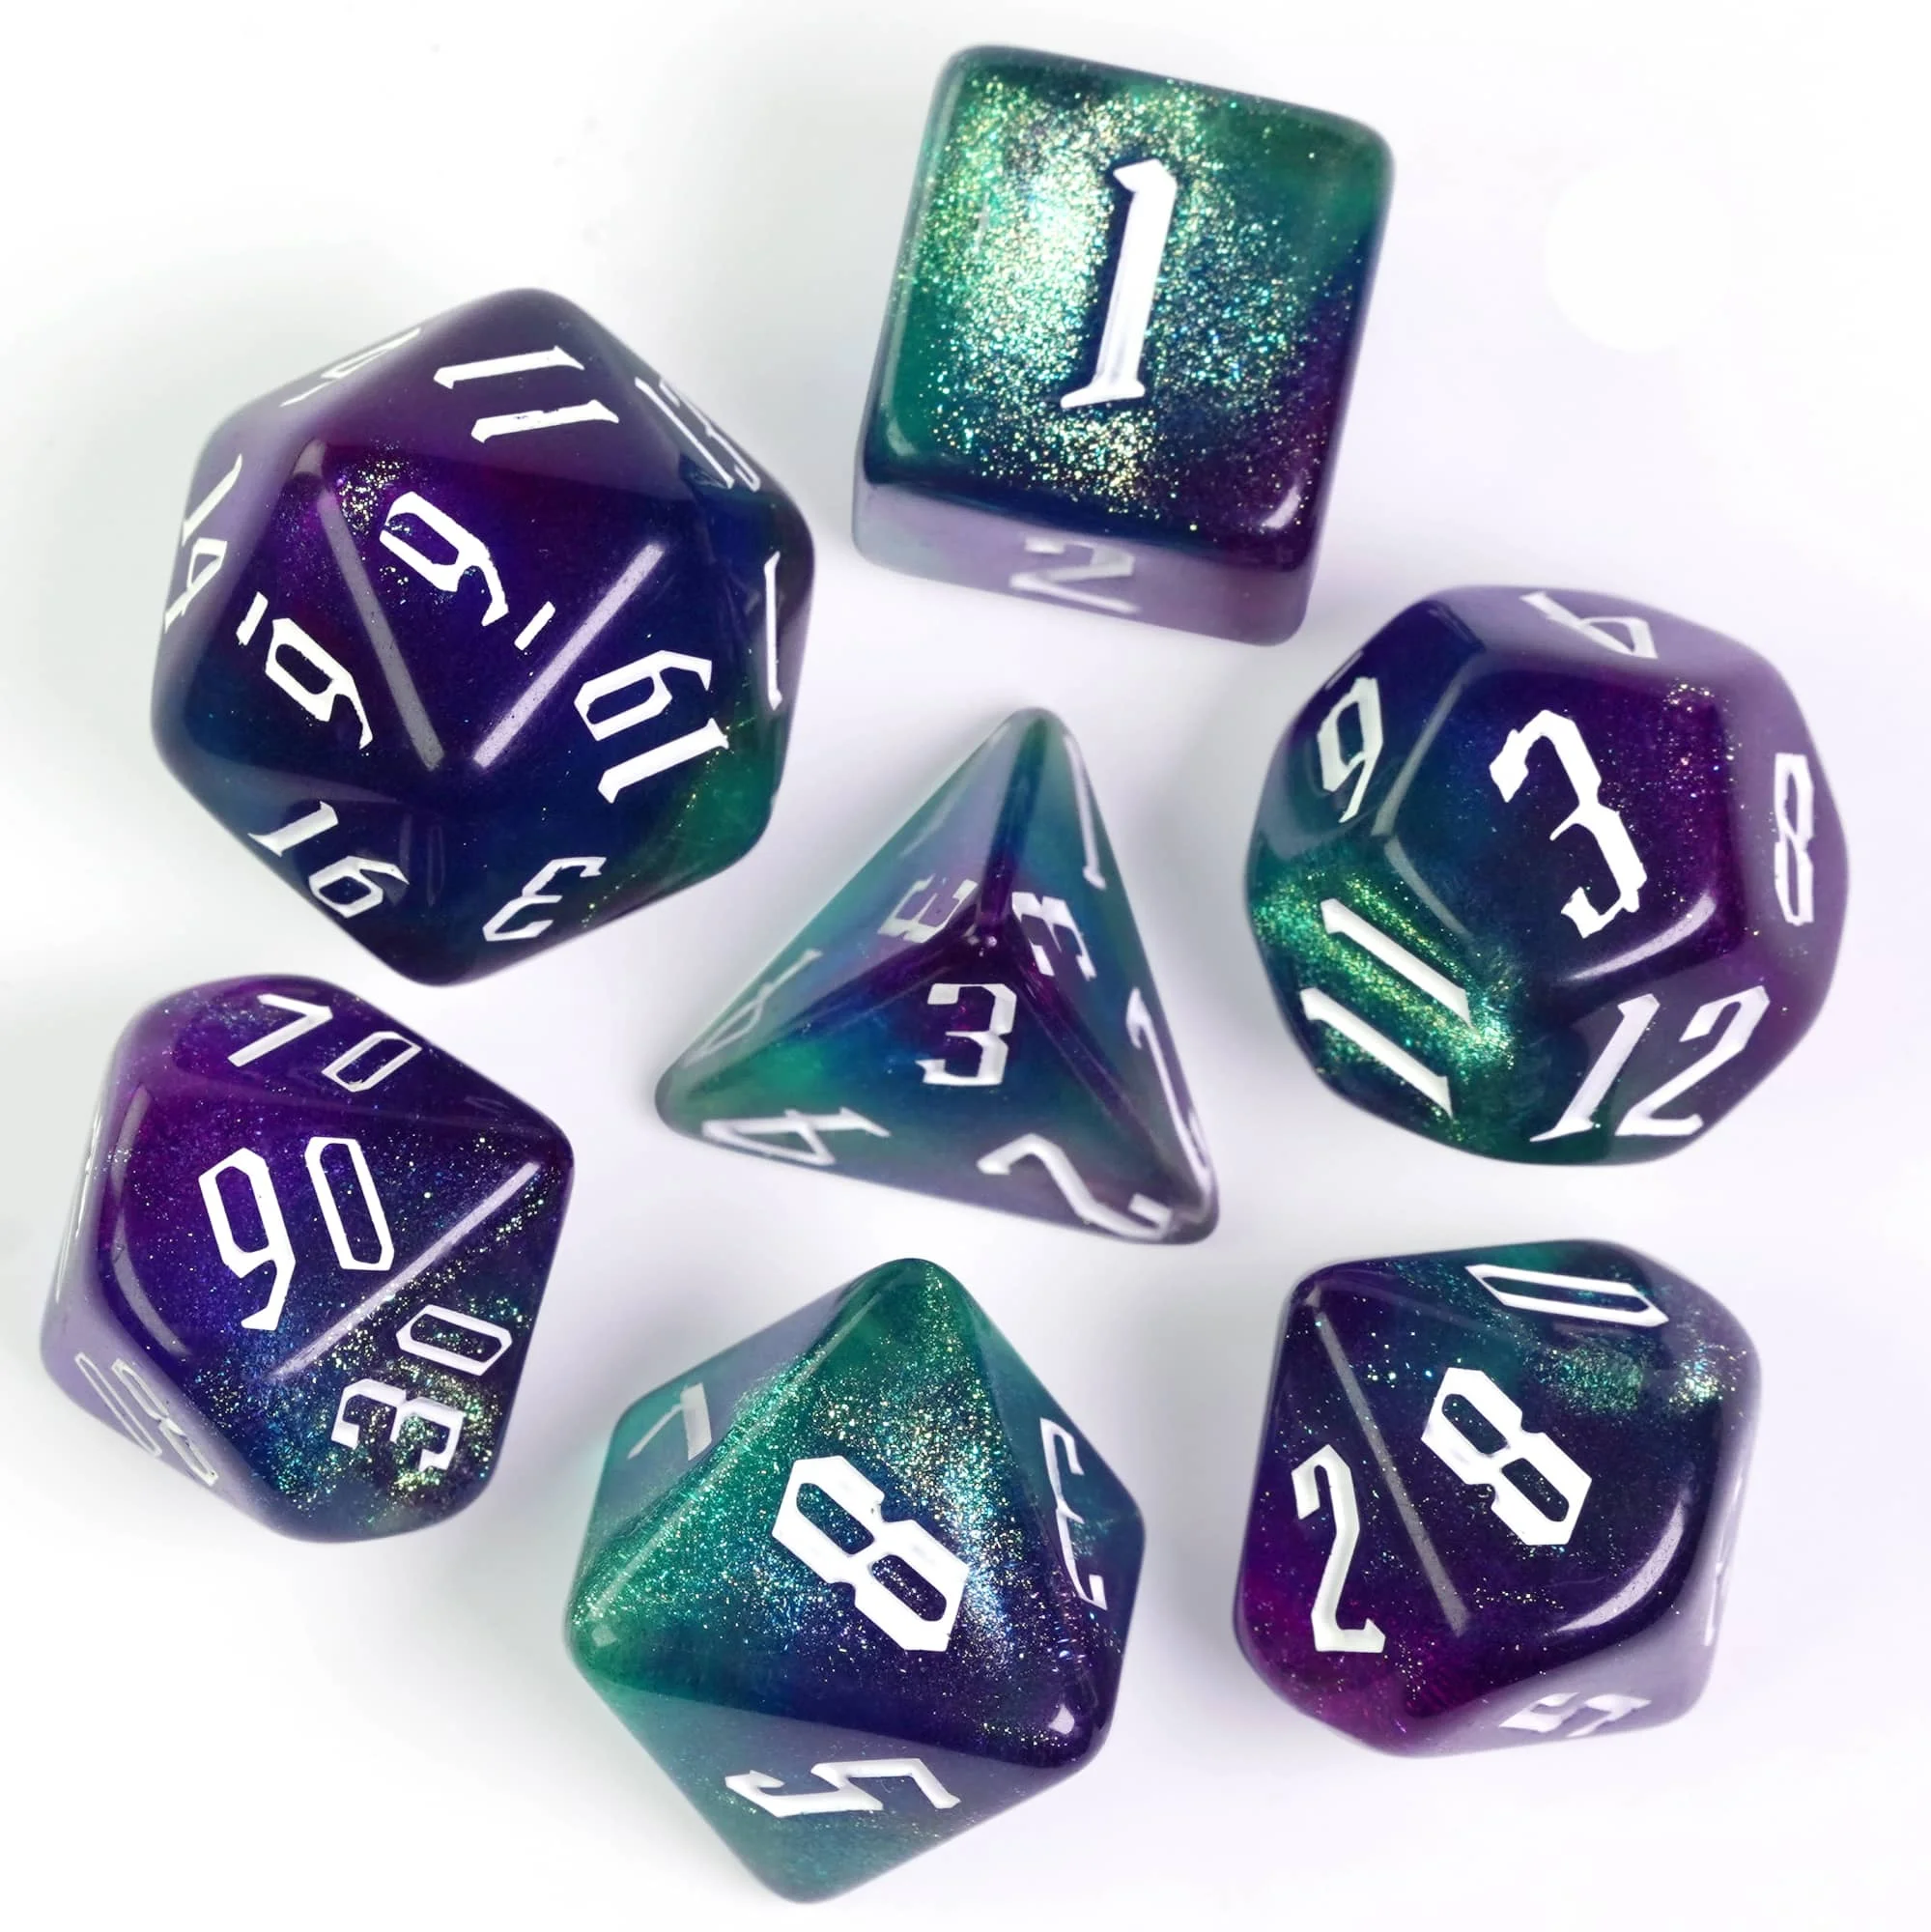 

7Pcs/Set Double-colors DND Dice Set with Glitter D4 D6 D8 D10 D% D12 D20 Polyhedral Dice for Role Playing Board Game DND RPG MTG